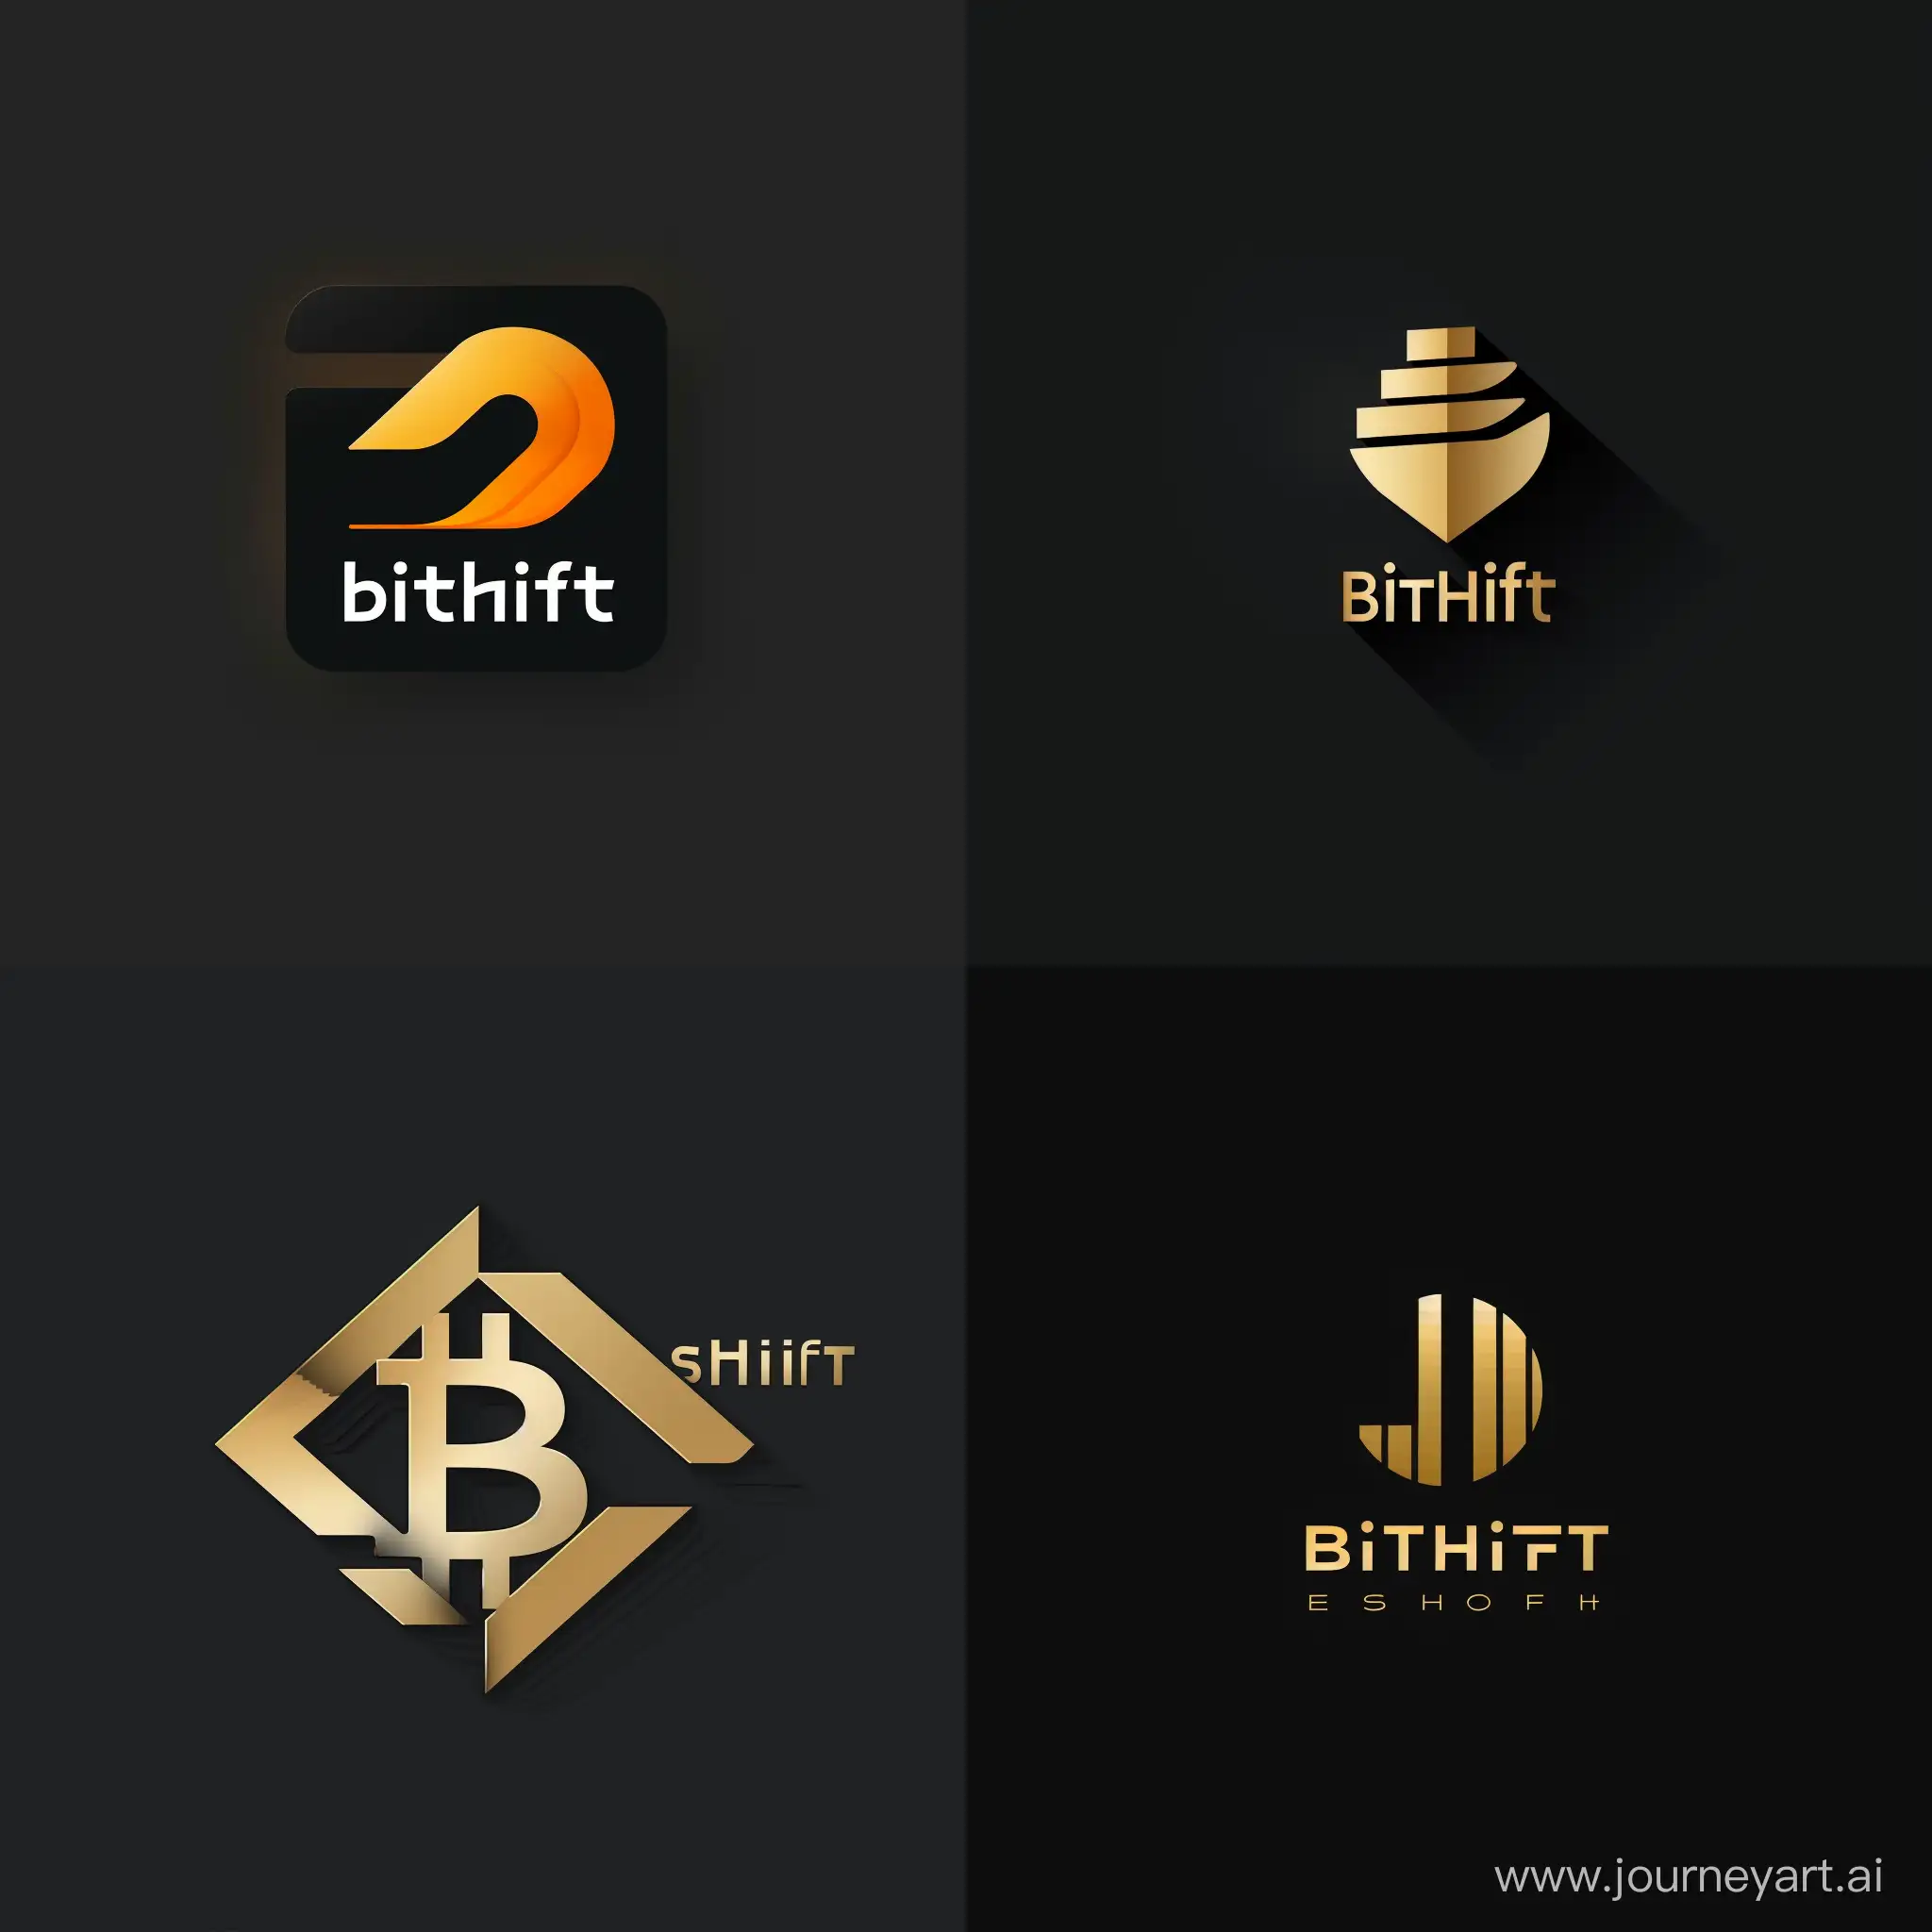 A modern, minimalist logo on a flat black background for a cryptocurrency and futures exchange platform called BitShift